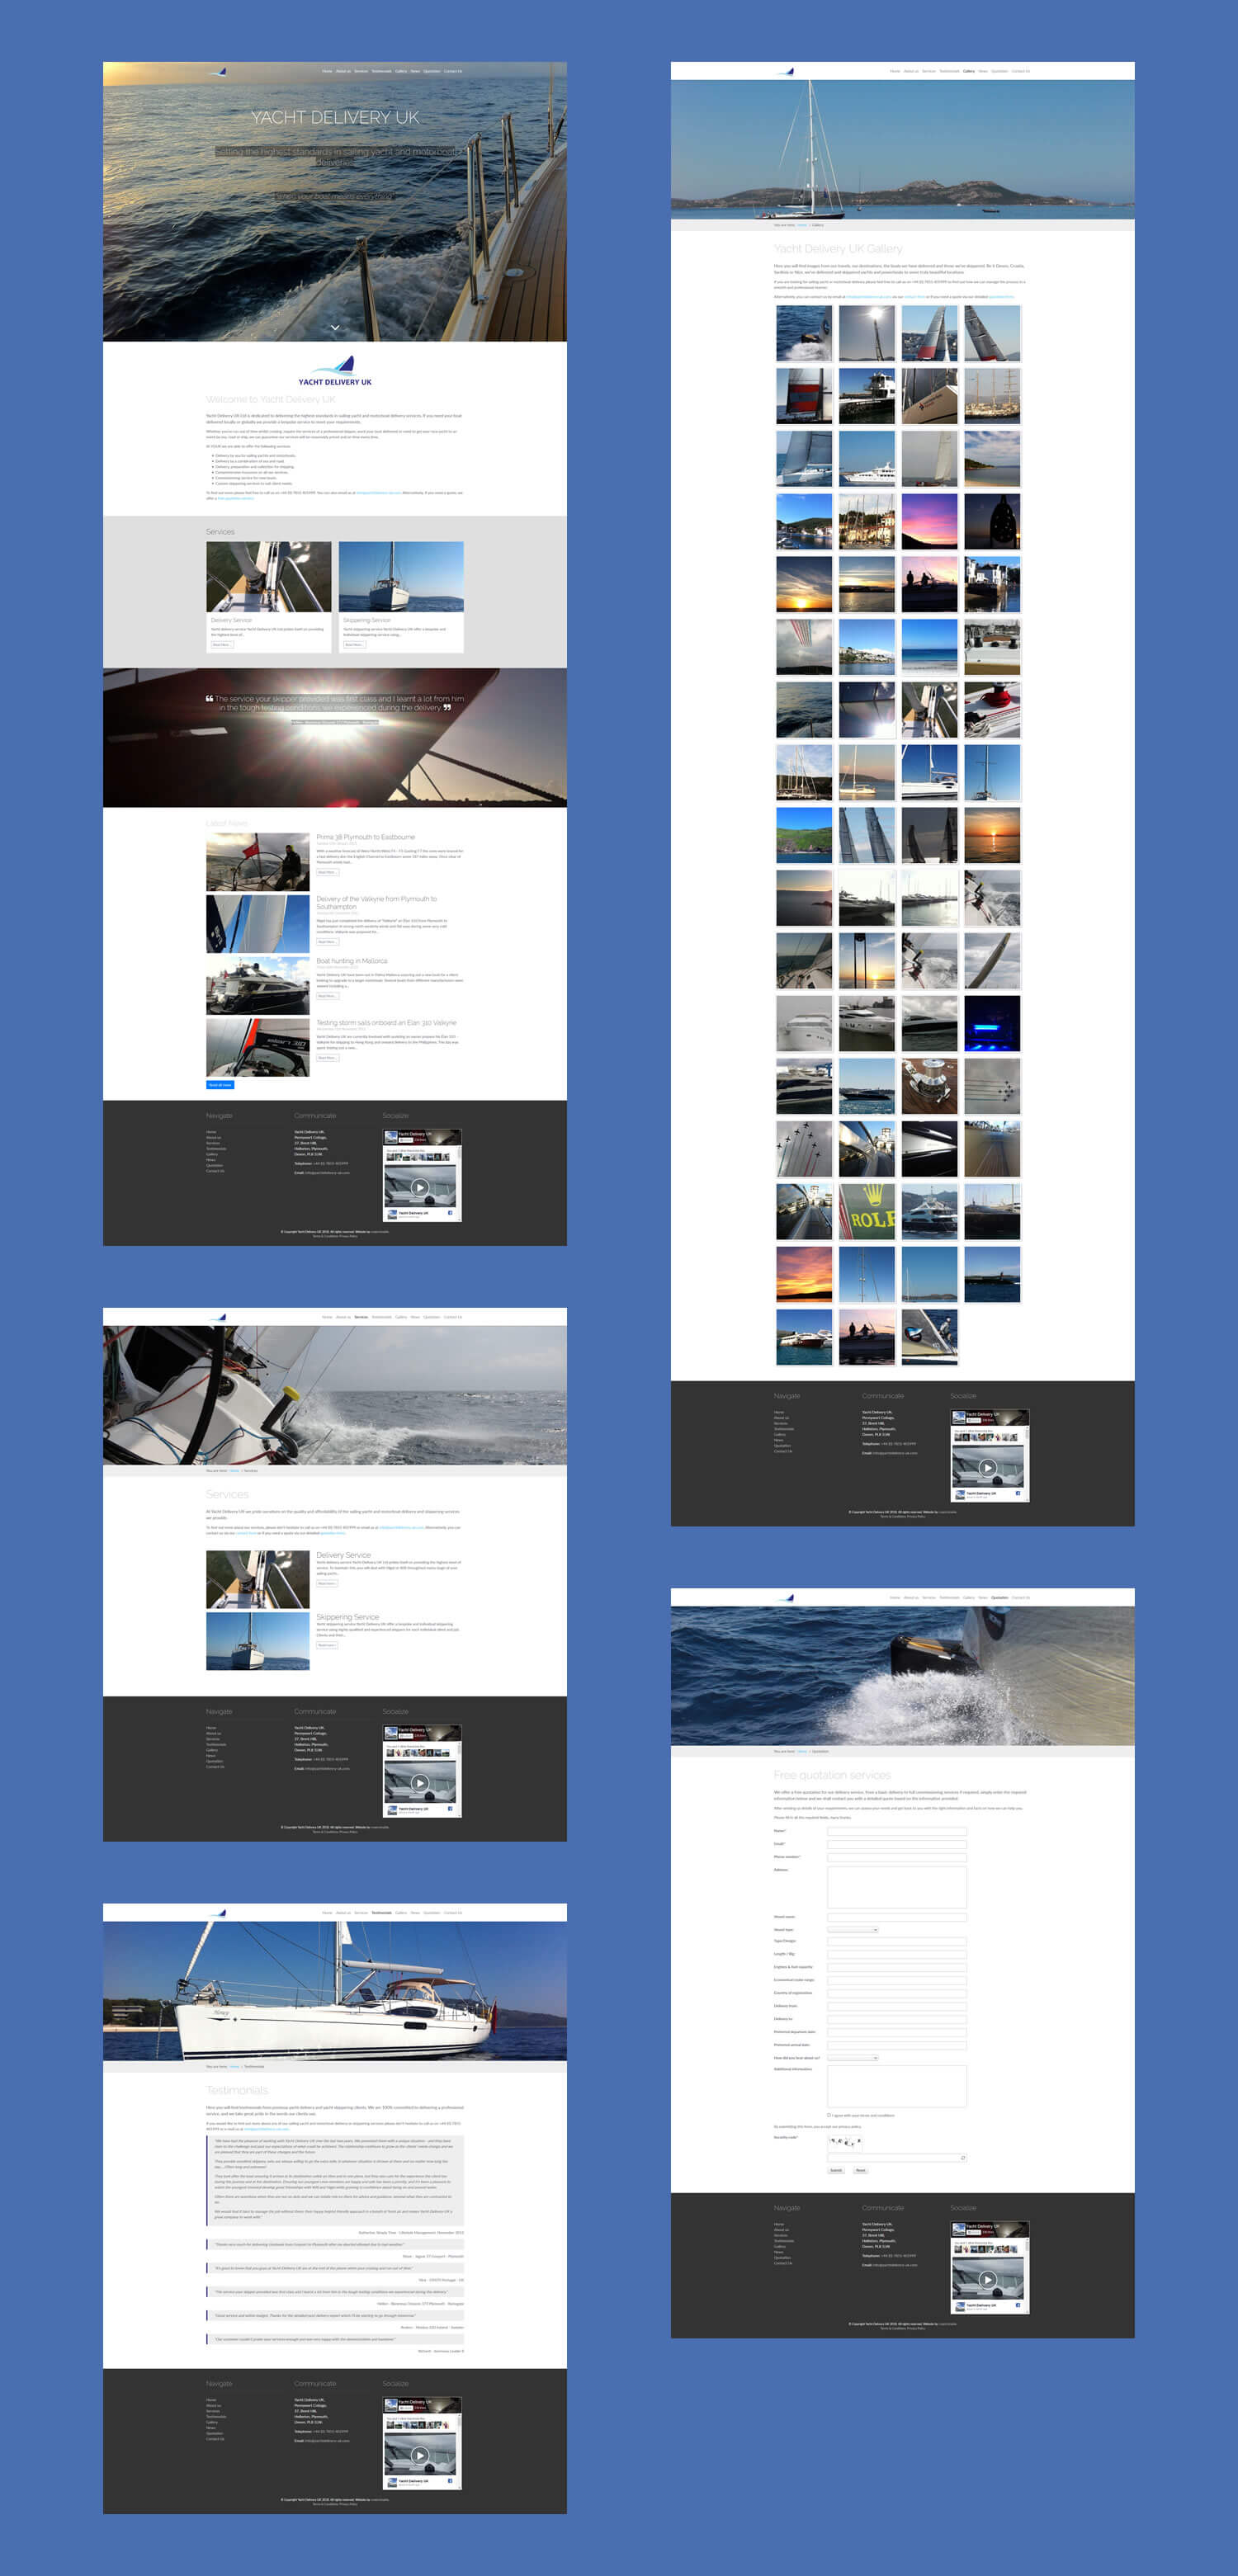 Yacht Delivery UK custom website design by create enable full pages